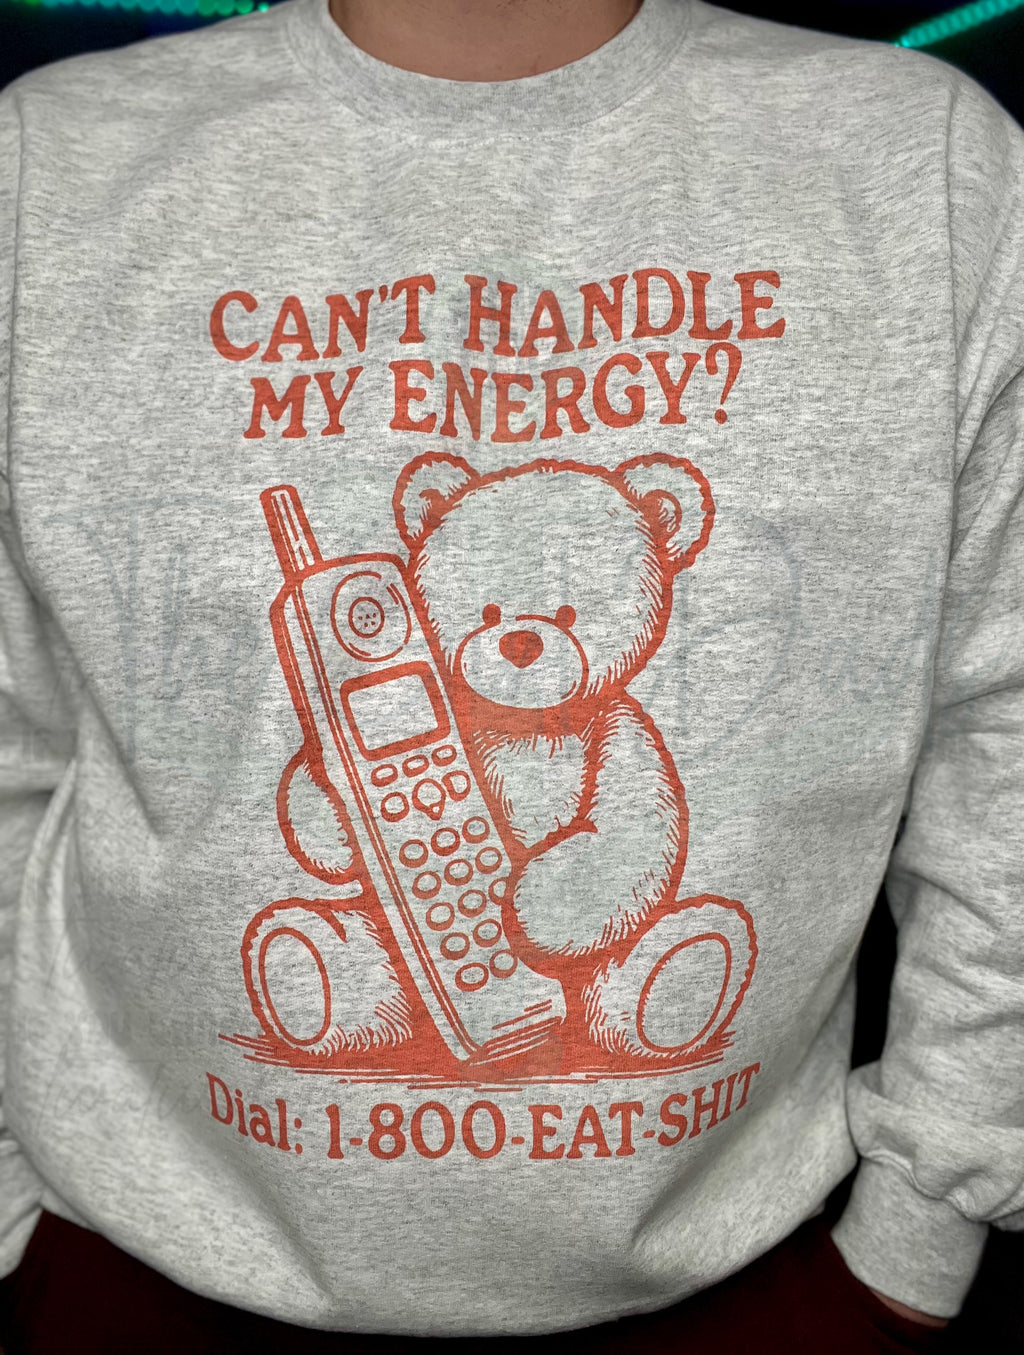 Can't Handle My Energy? Dial: 1-800-EAT-SHIT Top Design